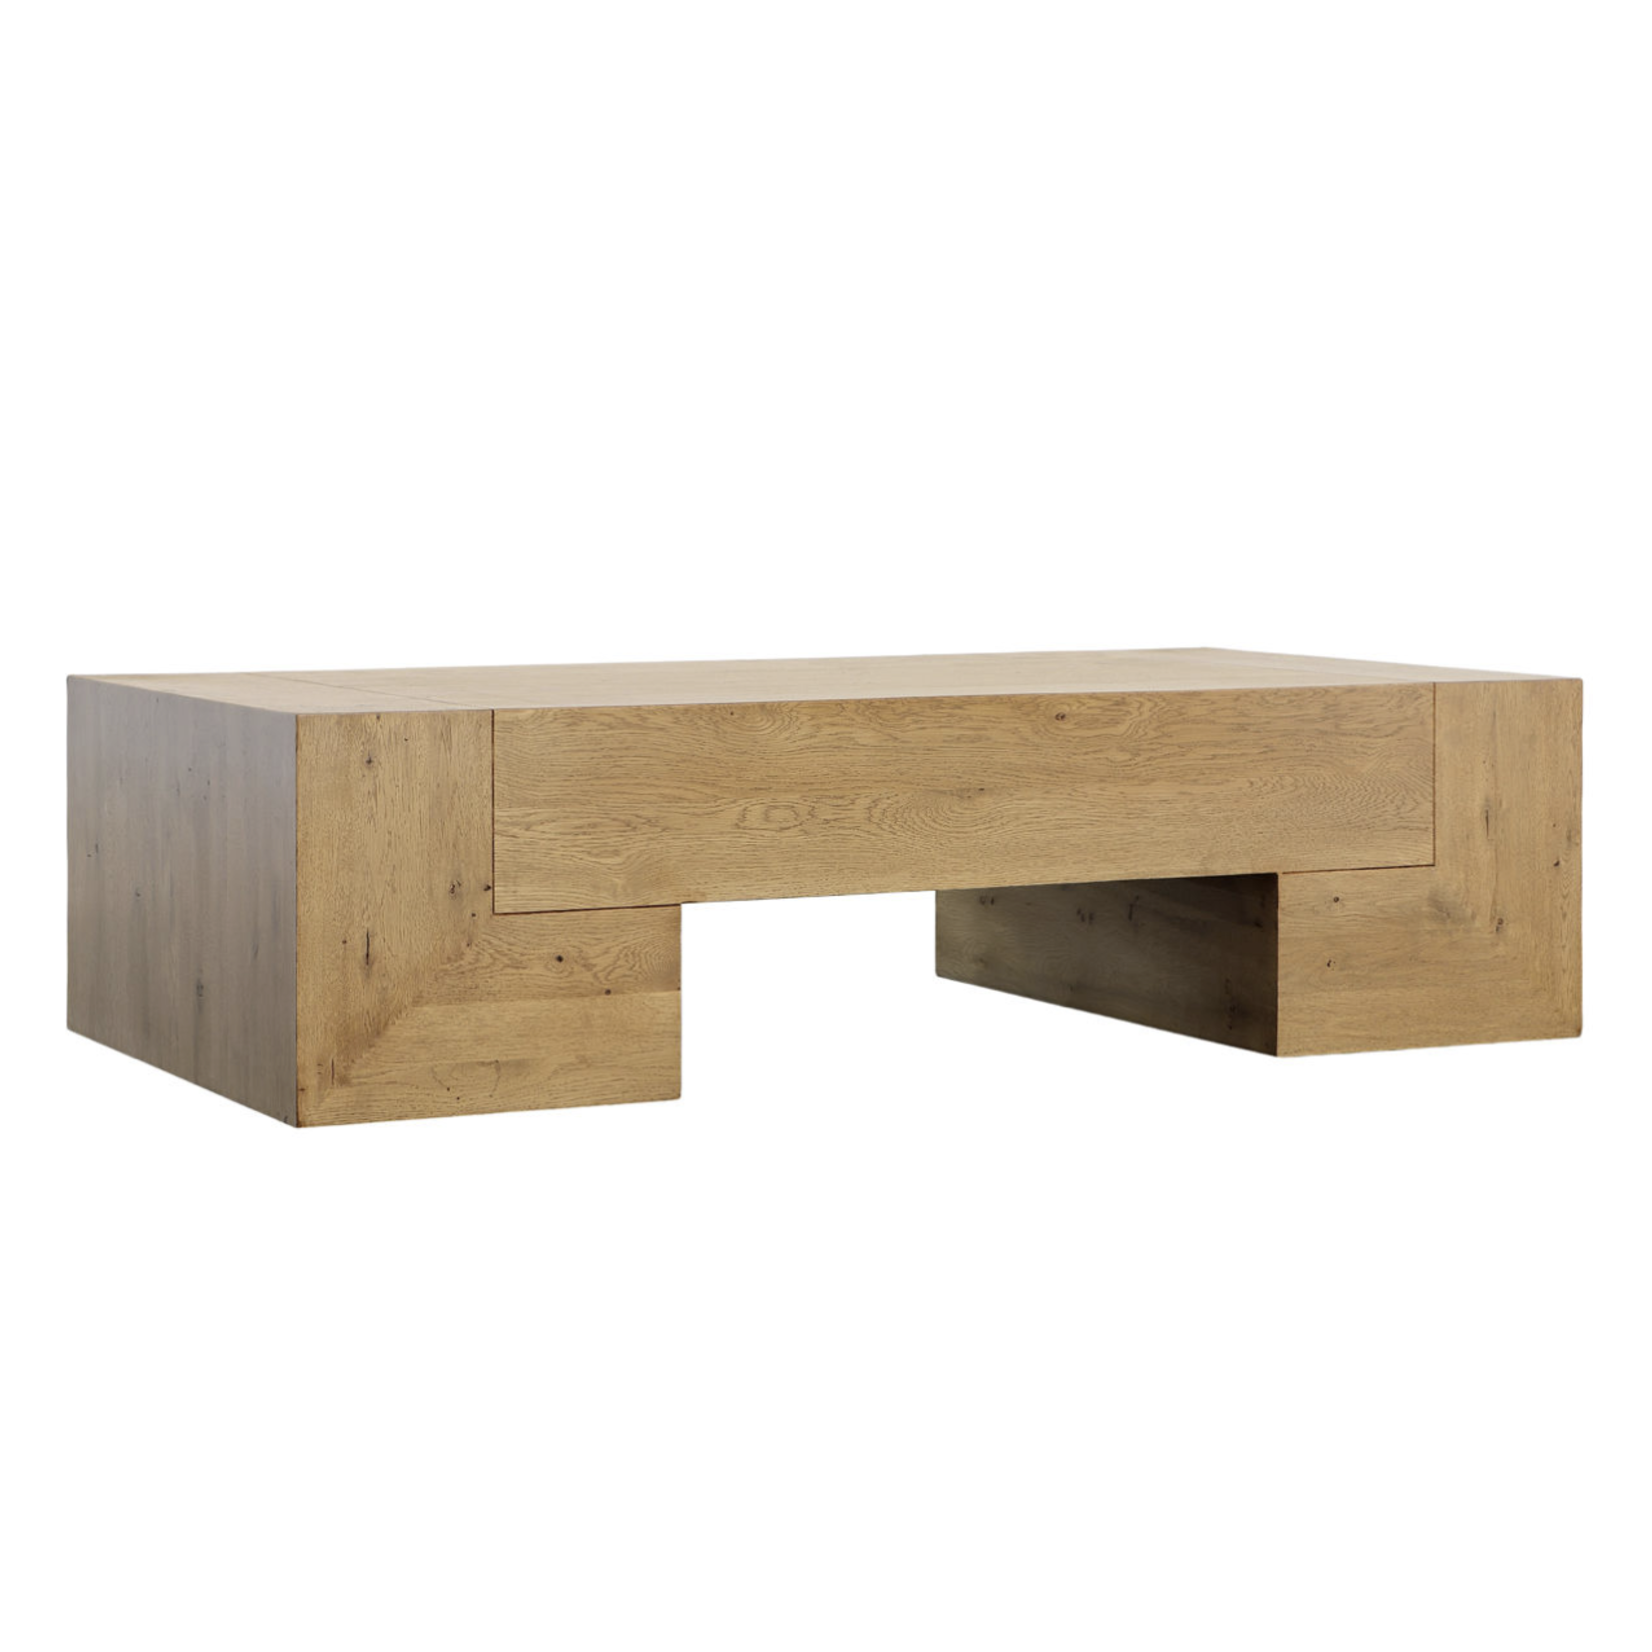 Outside The Box 59x32x16 Almanza Natural Solid Oak Wood Coffee Table